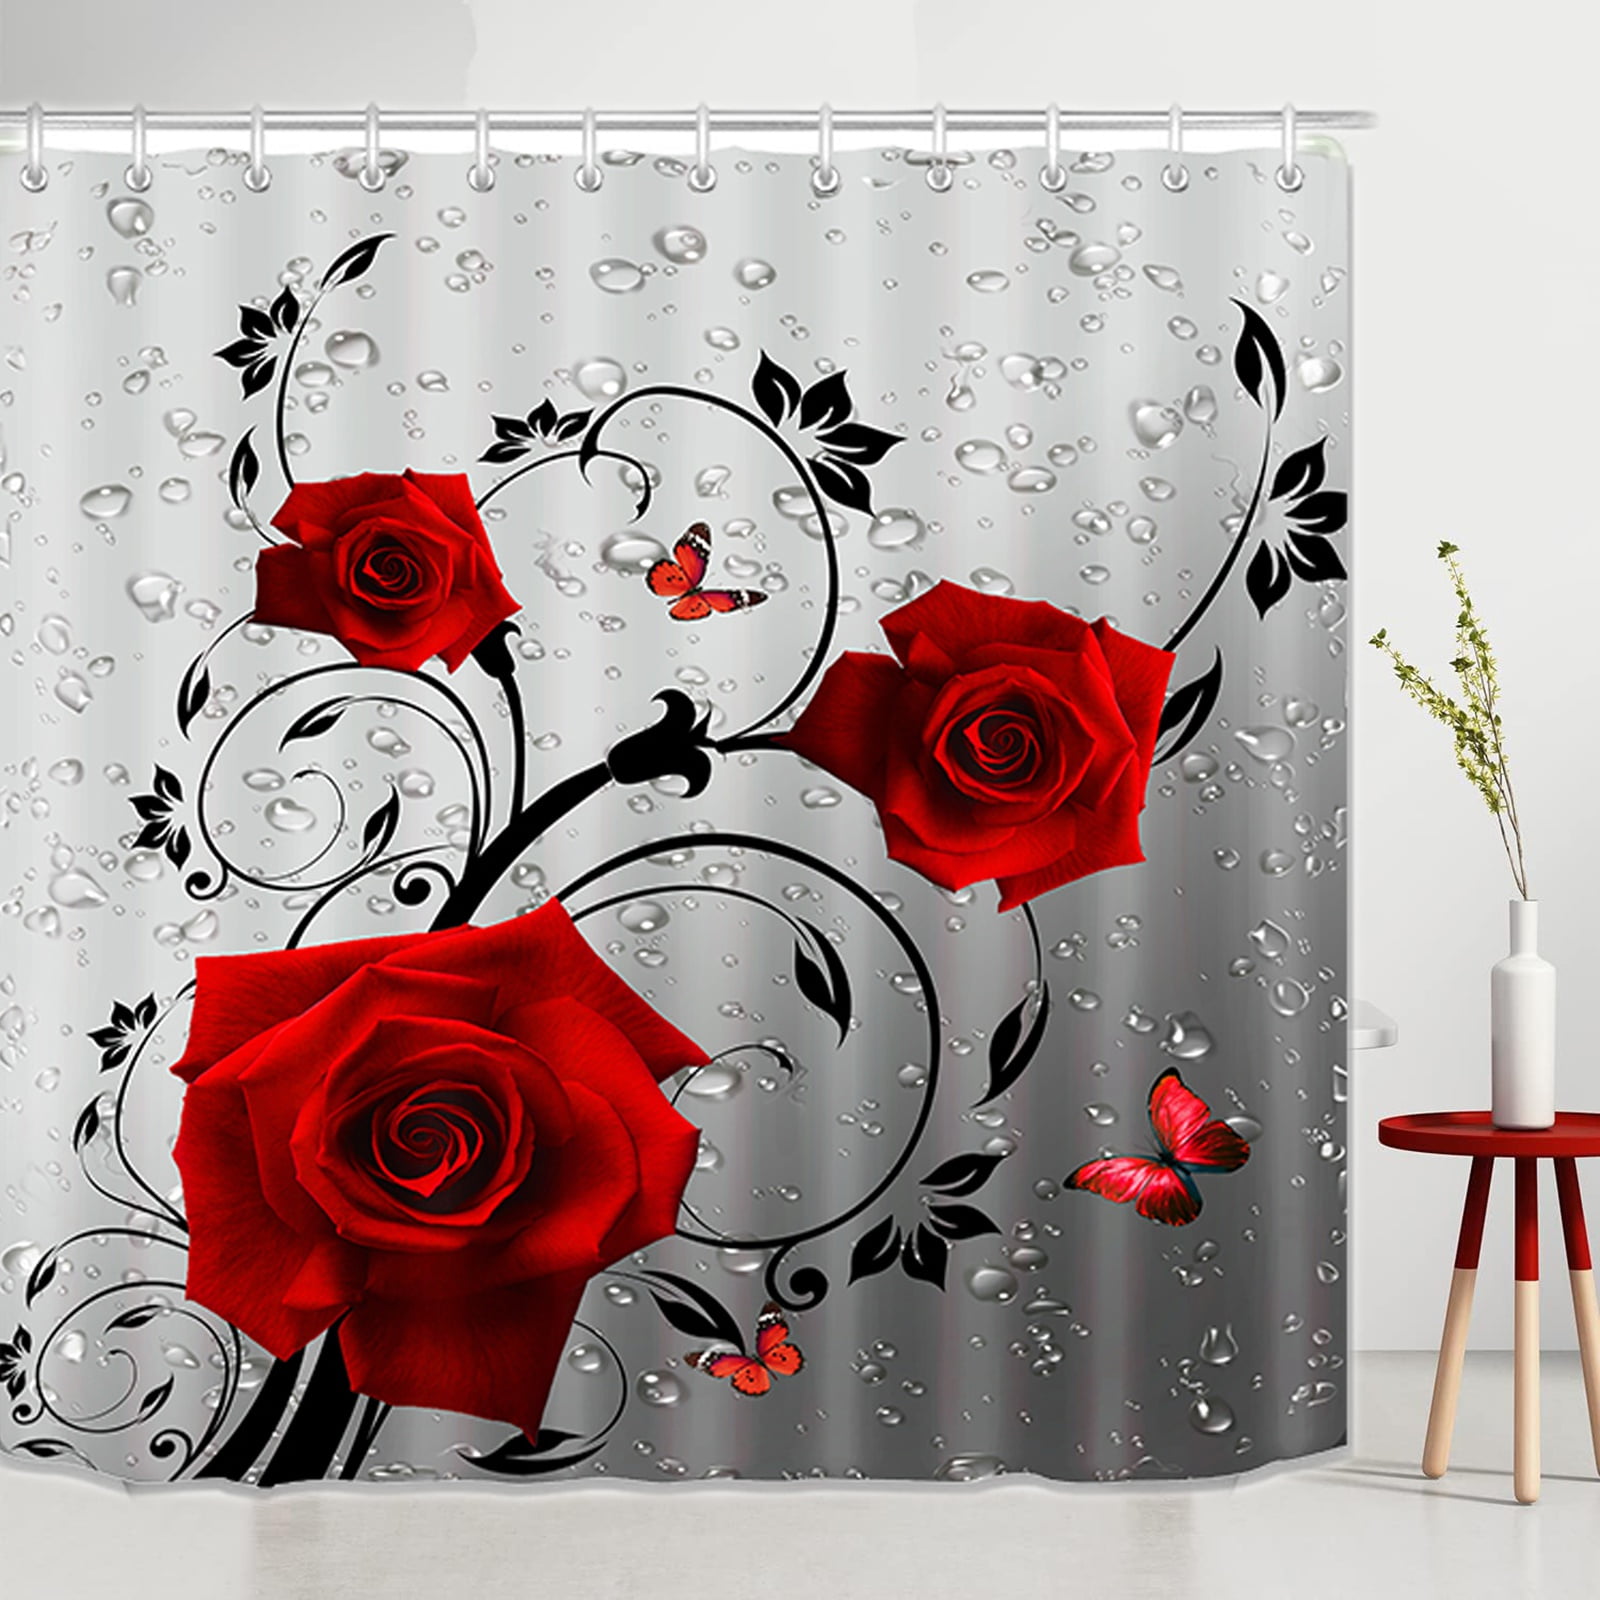 Rose Shower Curtain, Romantic Floral Blossom Red Rose Reflection on ...